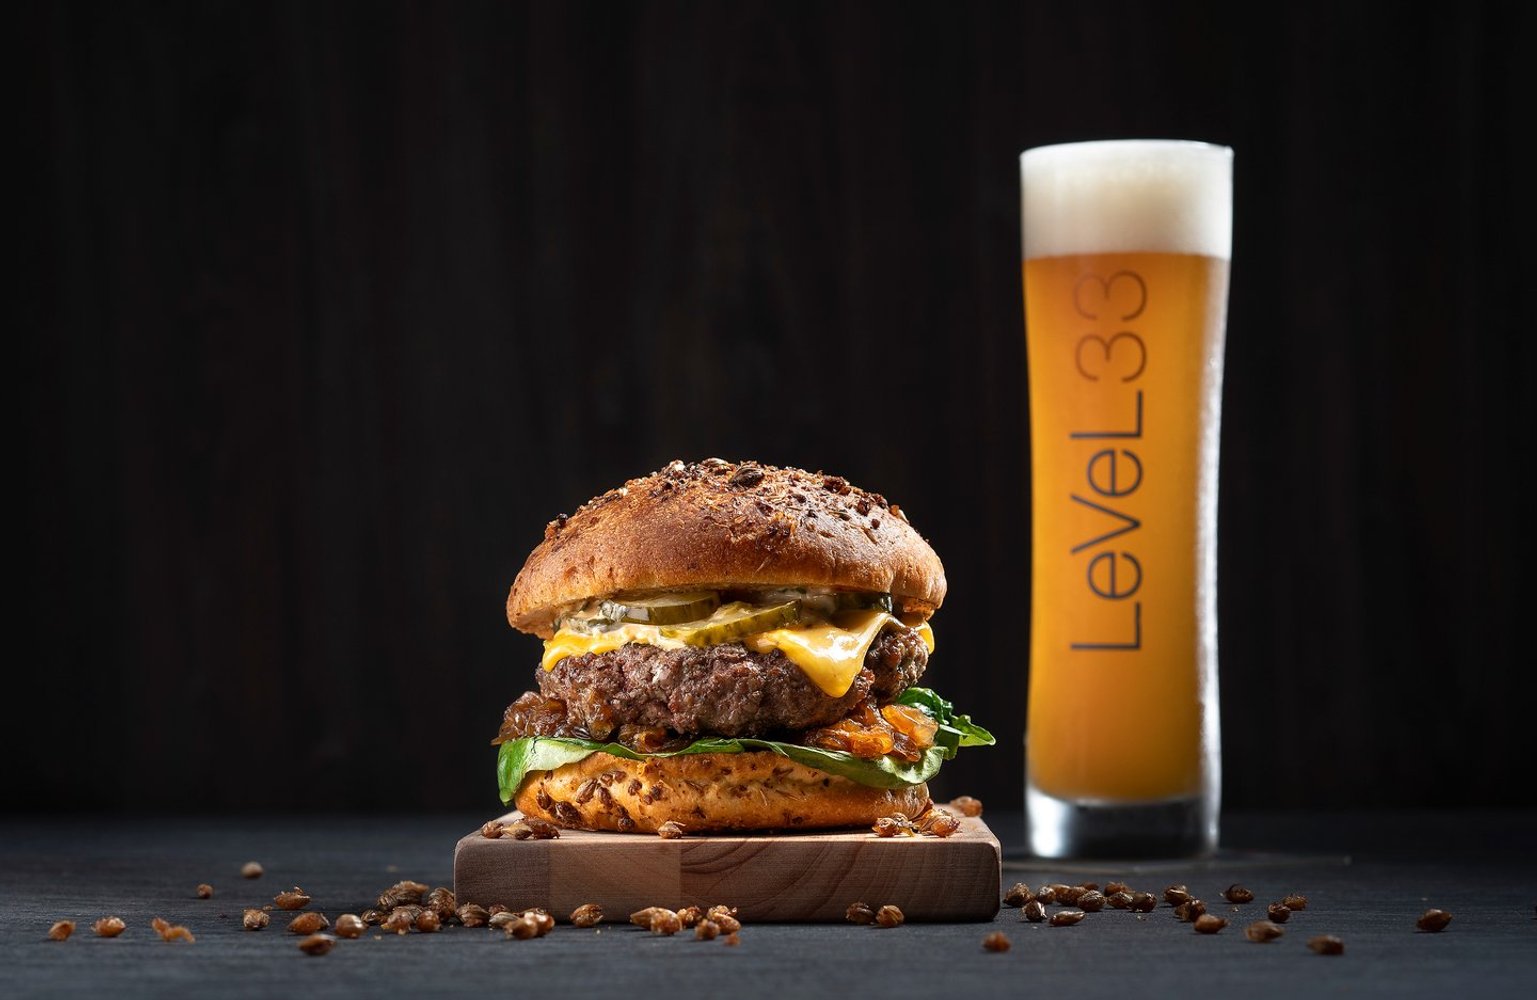 LeVeL33 Classic Brewery Burger, delivered islandwide in Singapore powered by Oddle.